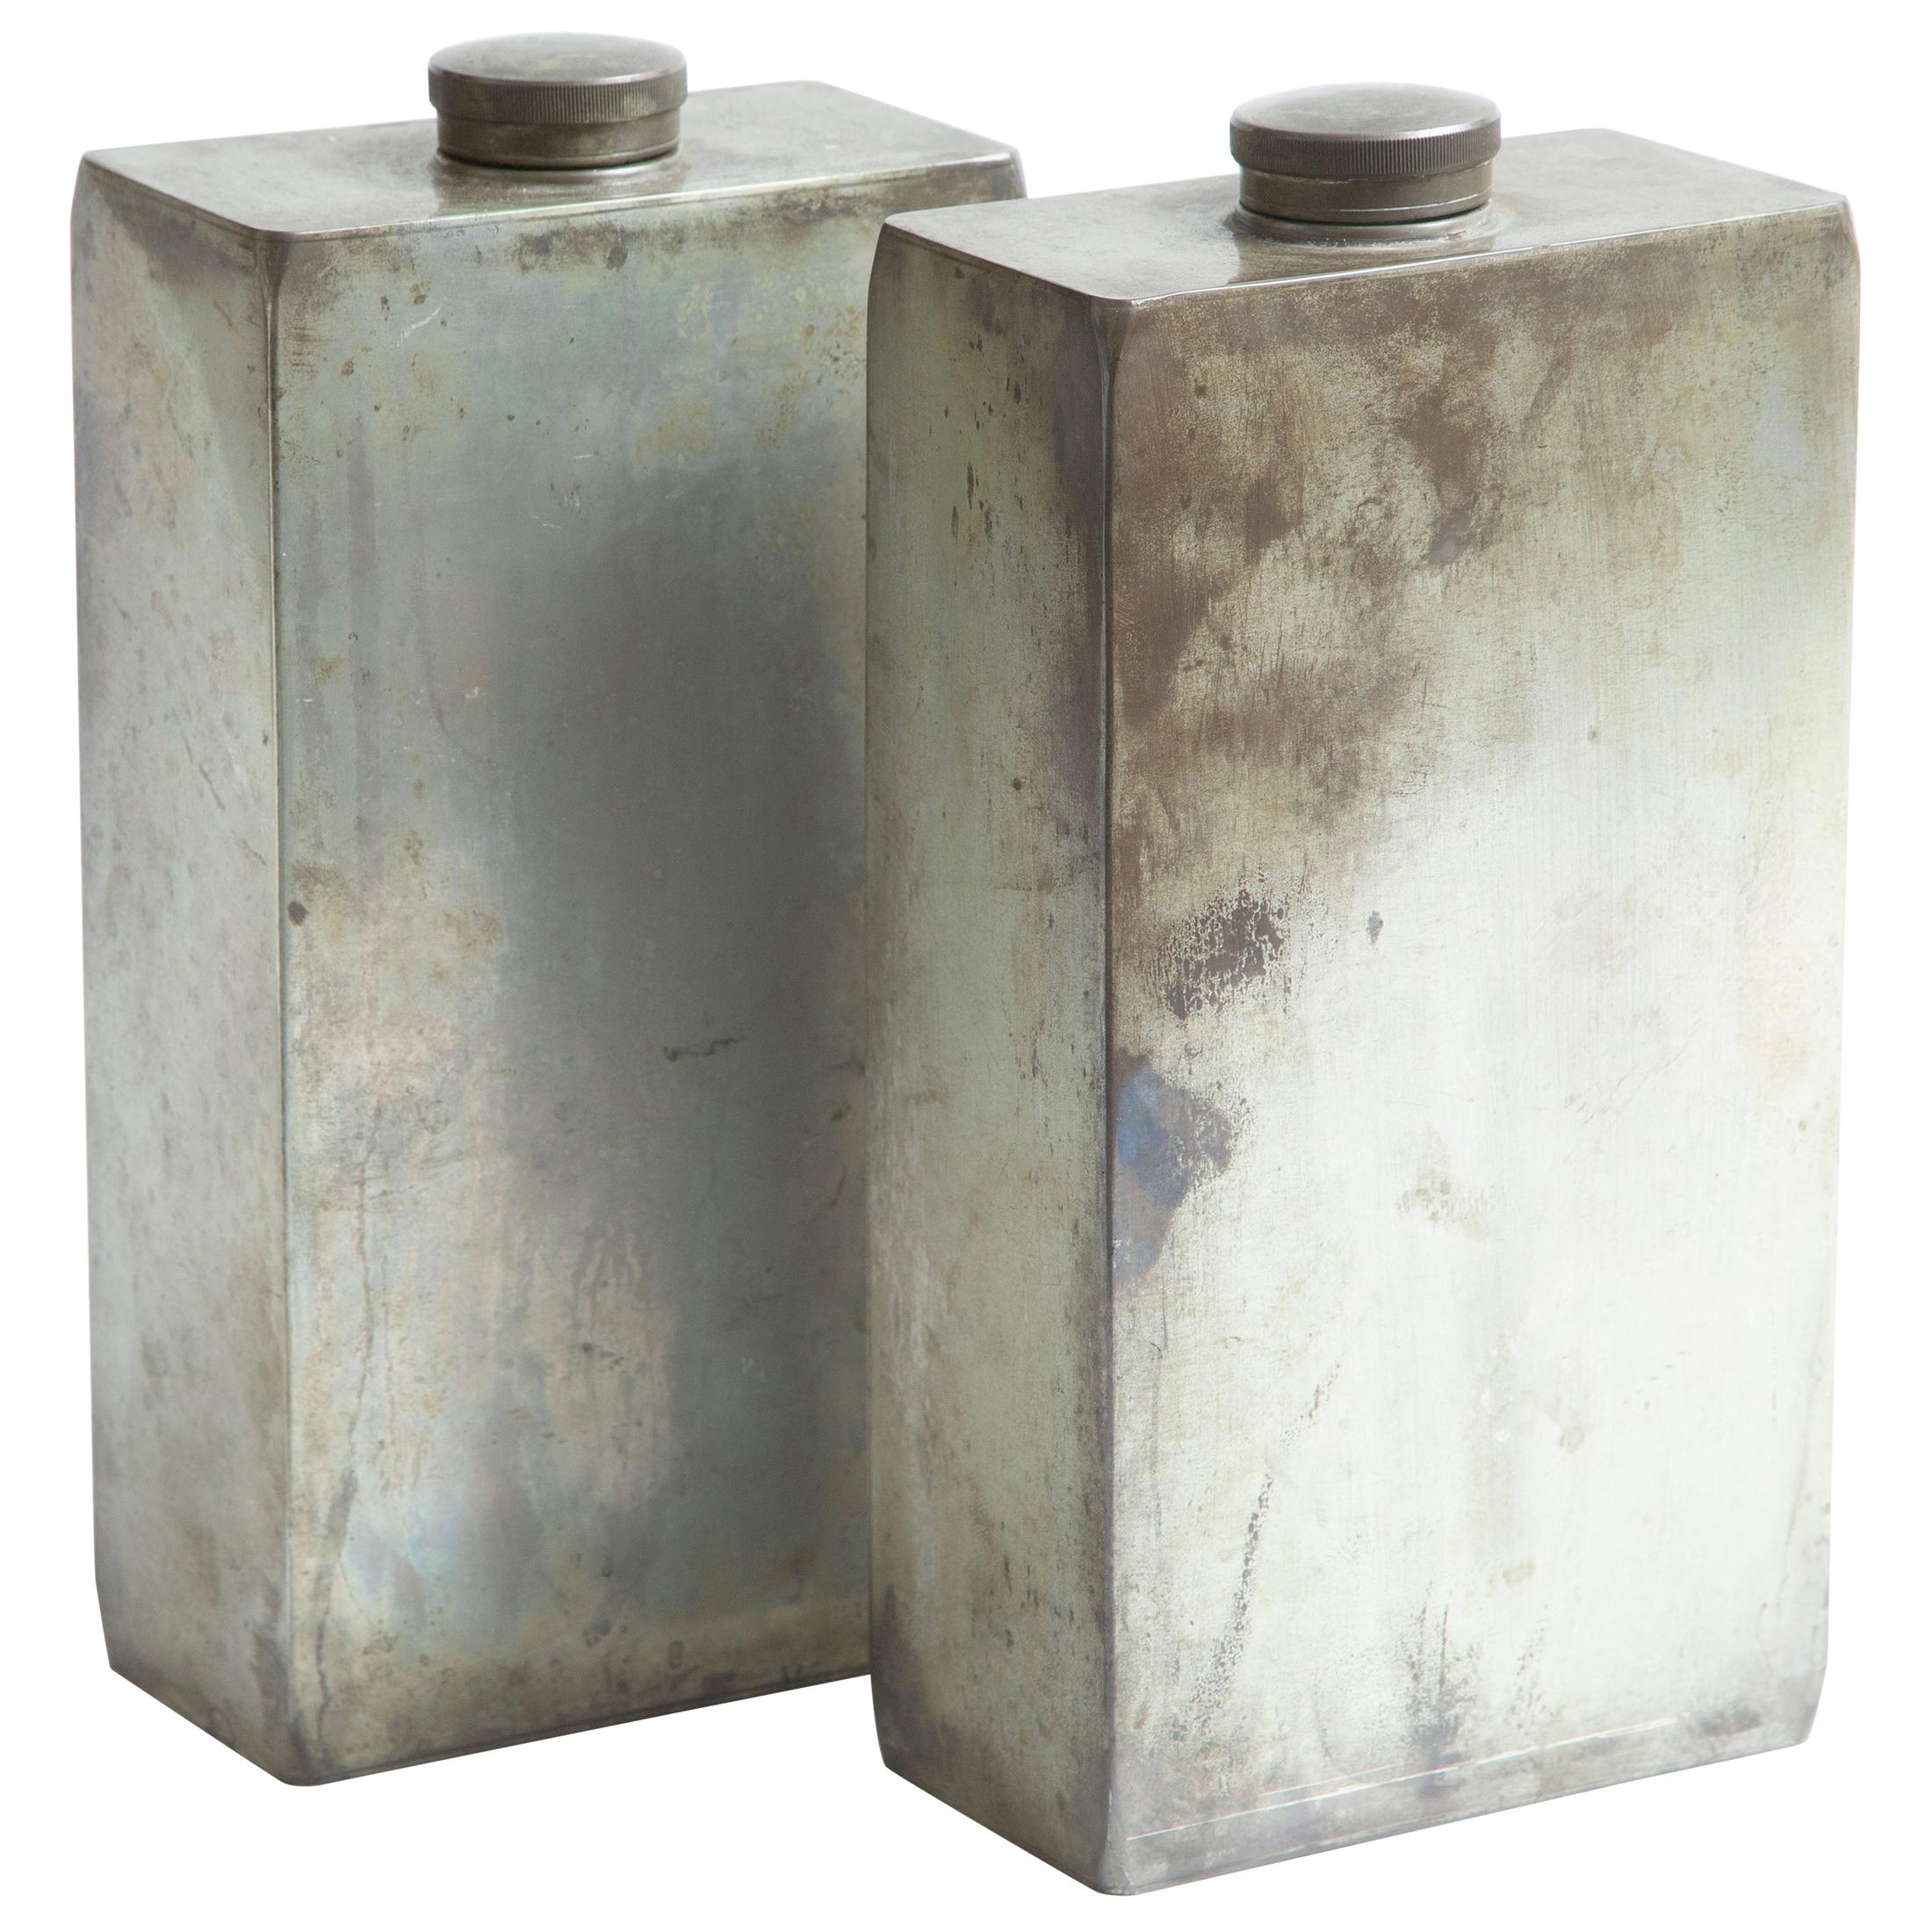 Abercrombie and Fitch Silver-Plated Flasks